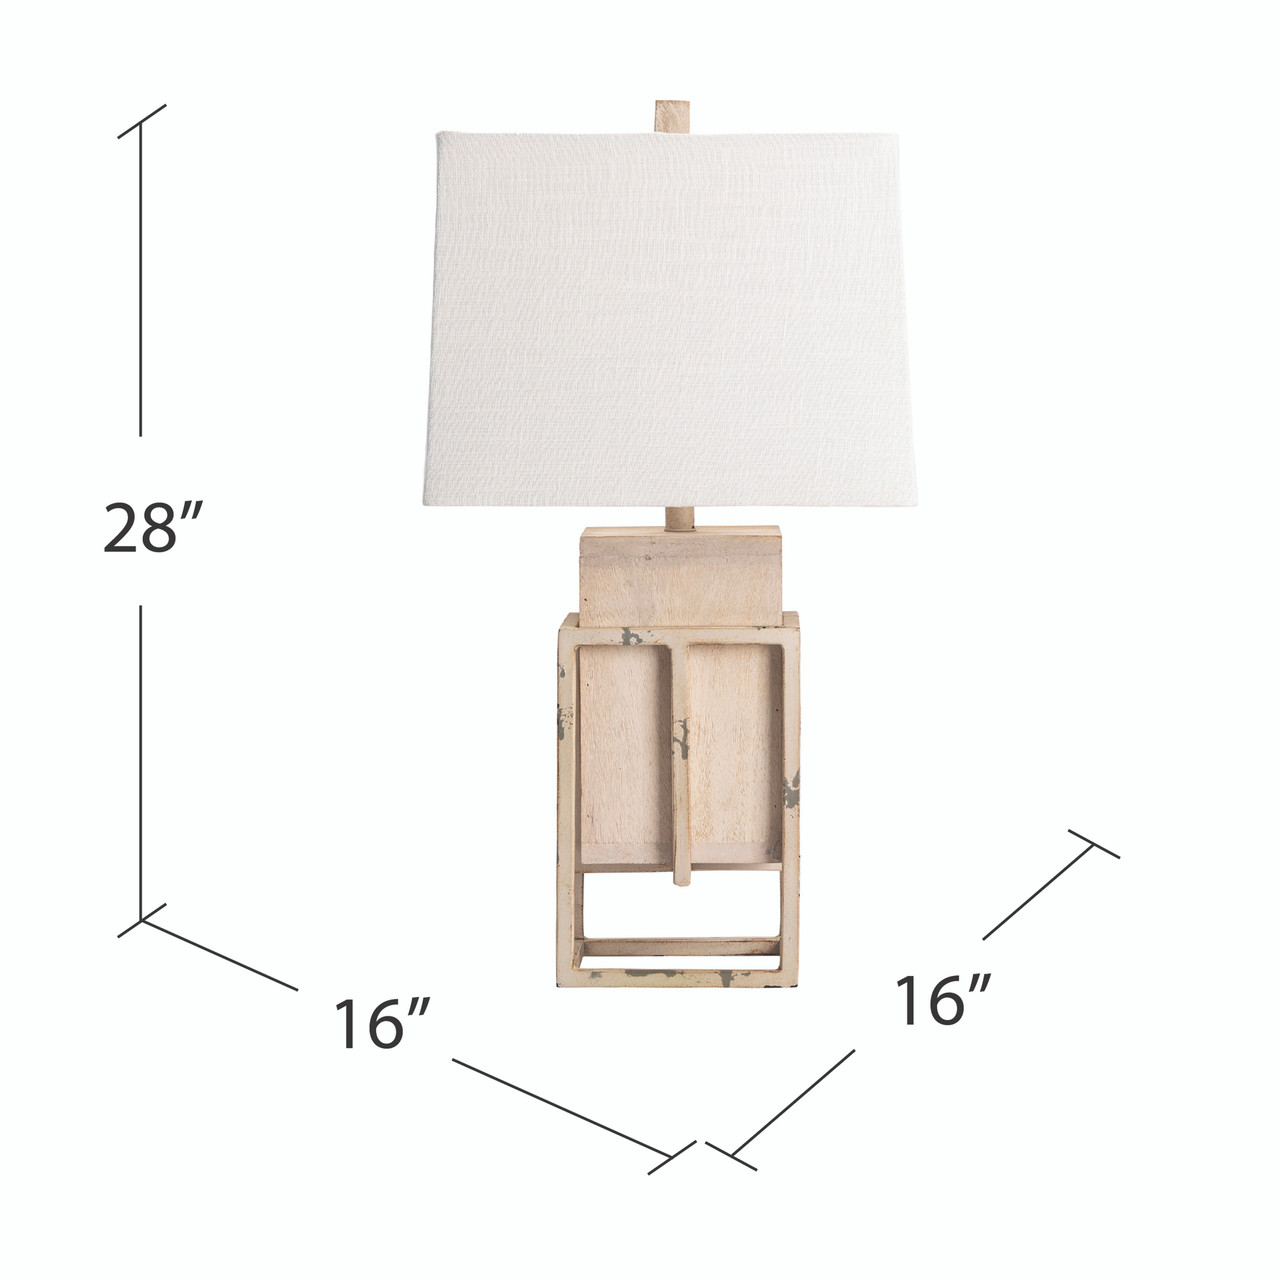 CRESTVIEW COLLECTION CVIDA013 29.5"TH, WOODEN W/GI TABLE LAMP 1PCS UPS PACK / 4.25'